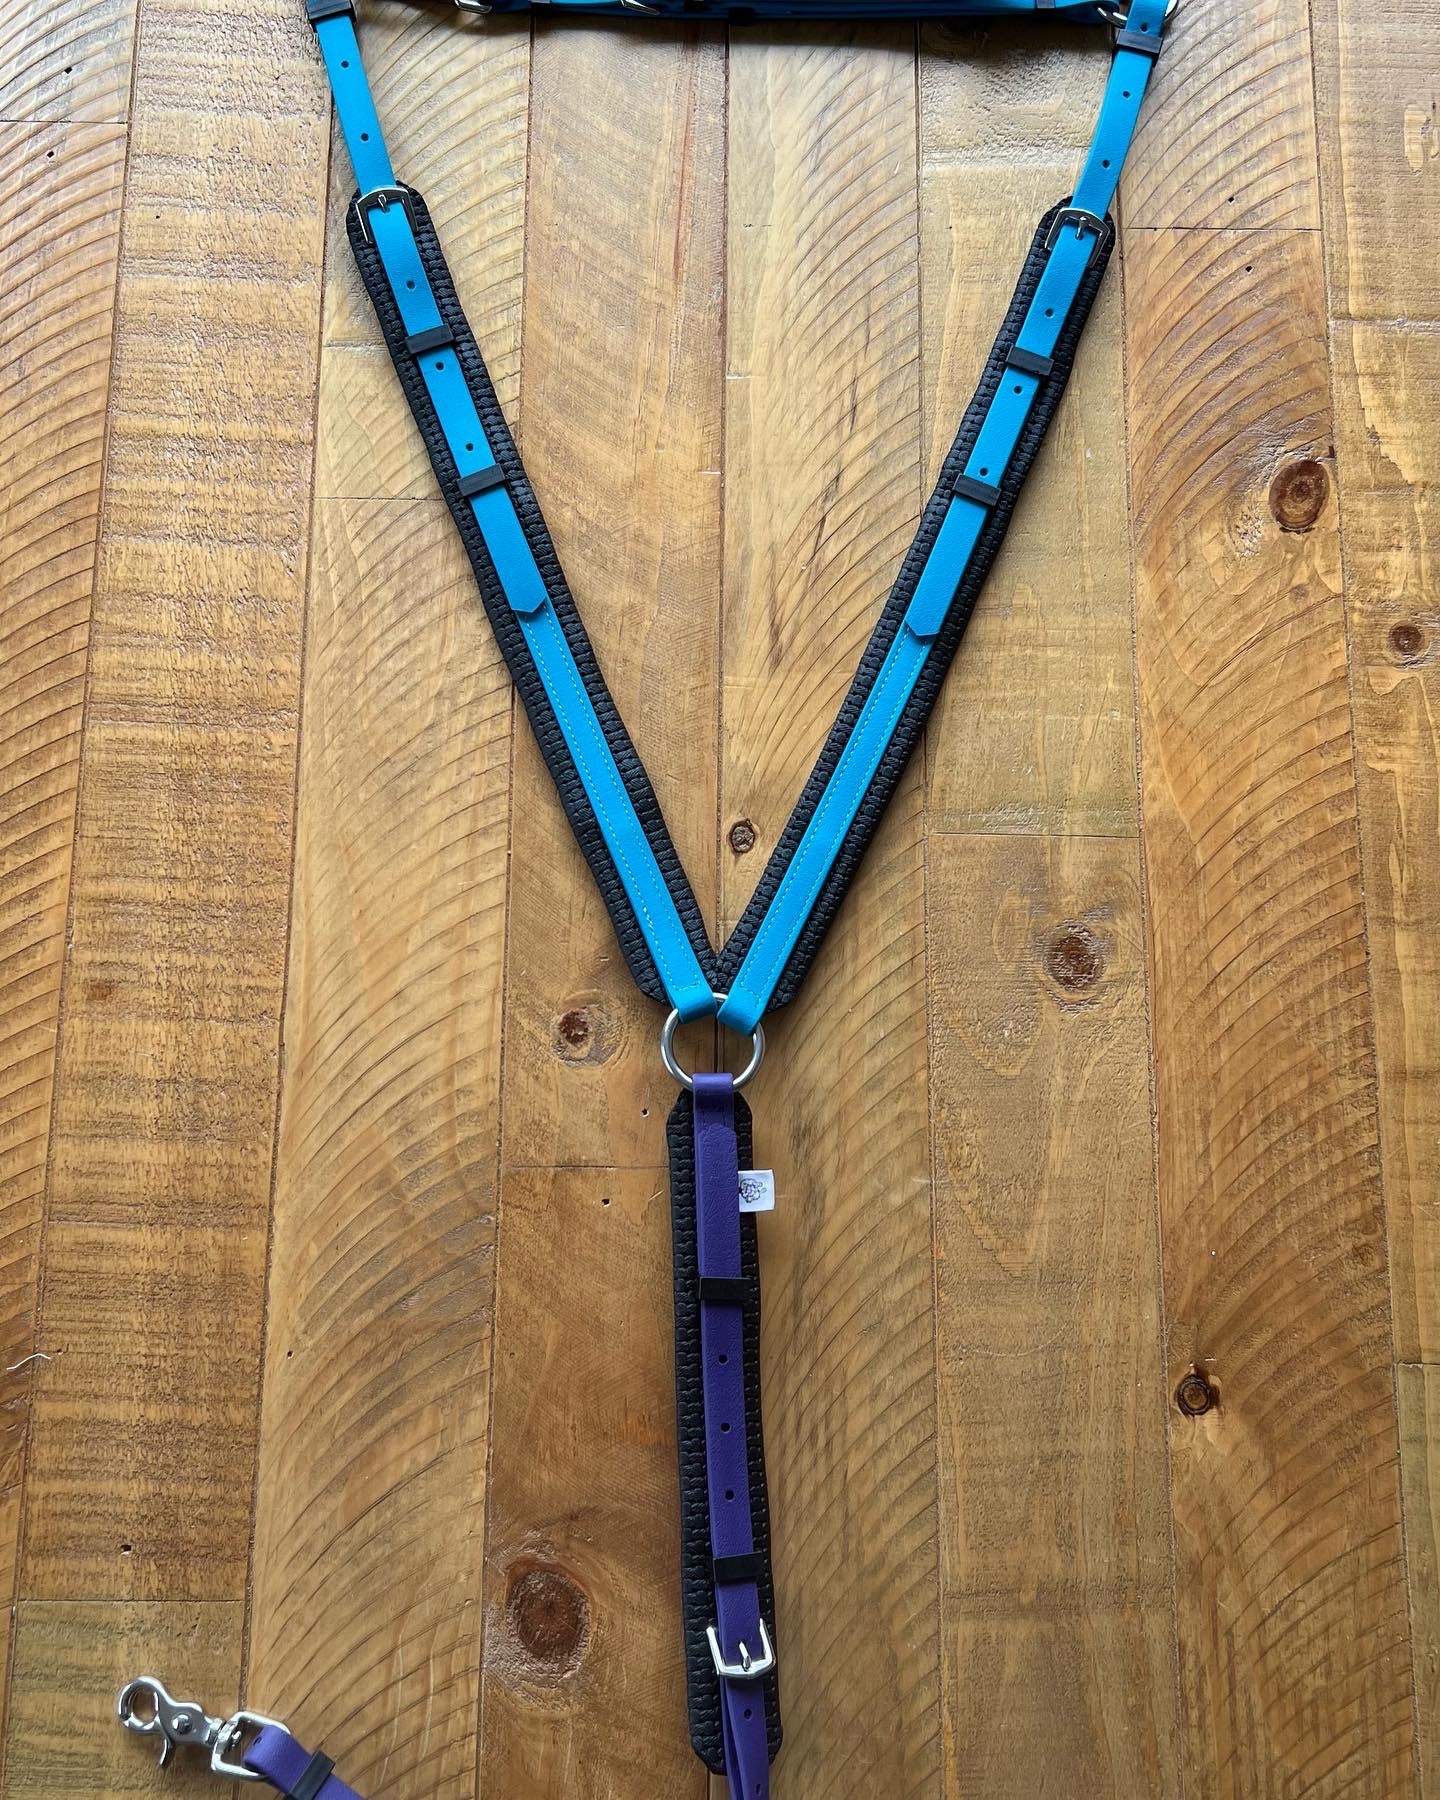 A V-shaped Biothane ®️ Breastplate - Design your own from LS Equestrian lies on a wooden surface, embodying the durability found in endurance bridles. The breastplate features blue and purple padded straps with black linings and silver hardware, including rings and buckles. A silver clasp is seen towards the bottom left corner of the image.